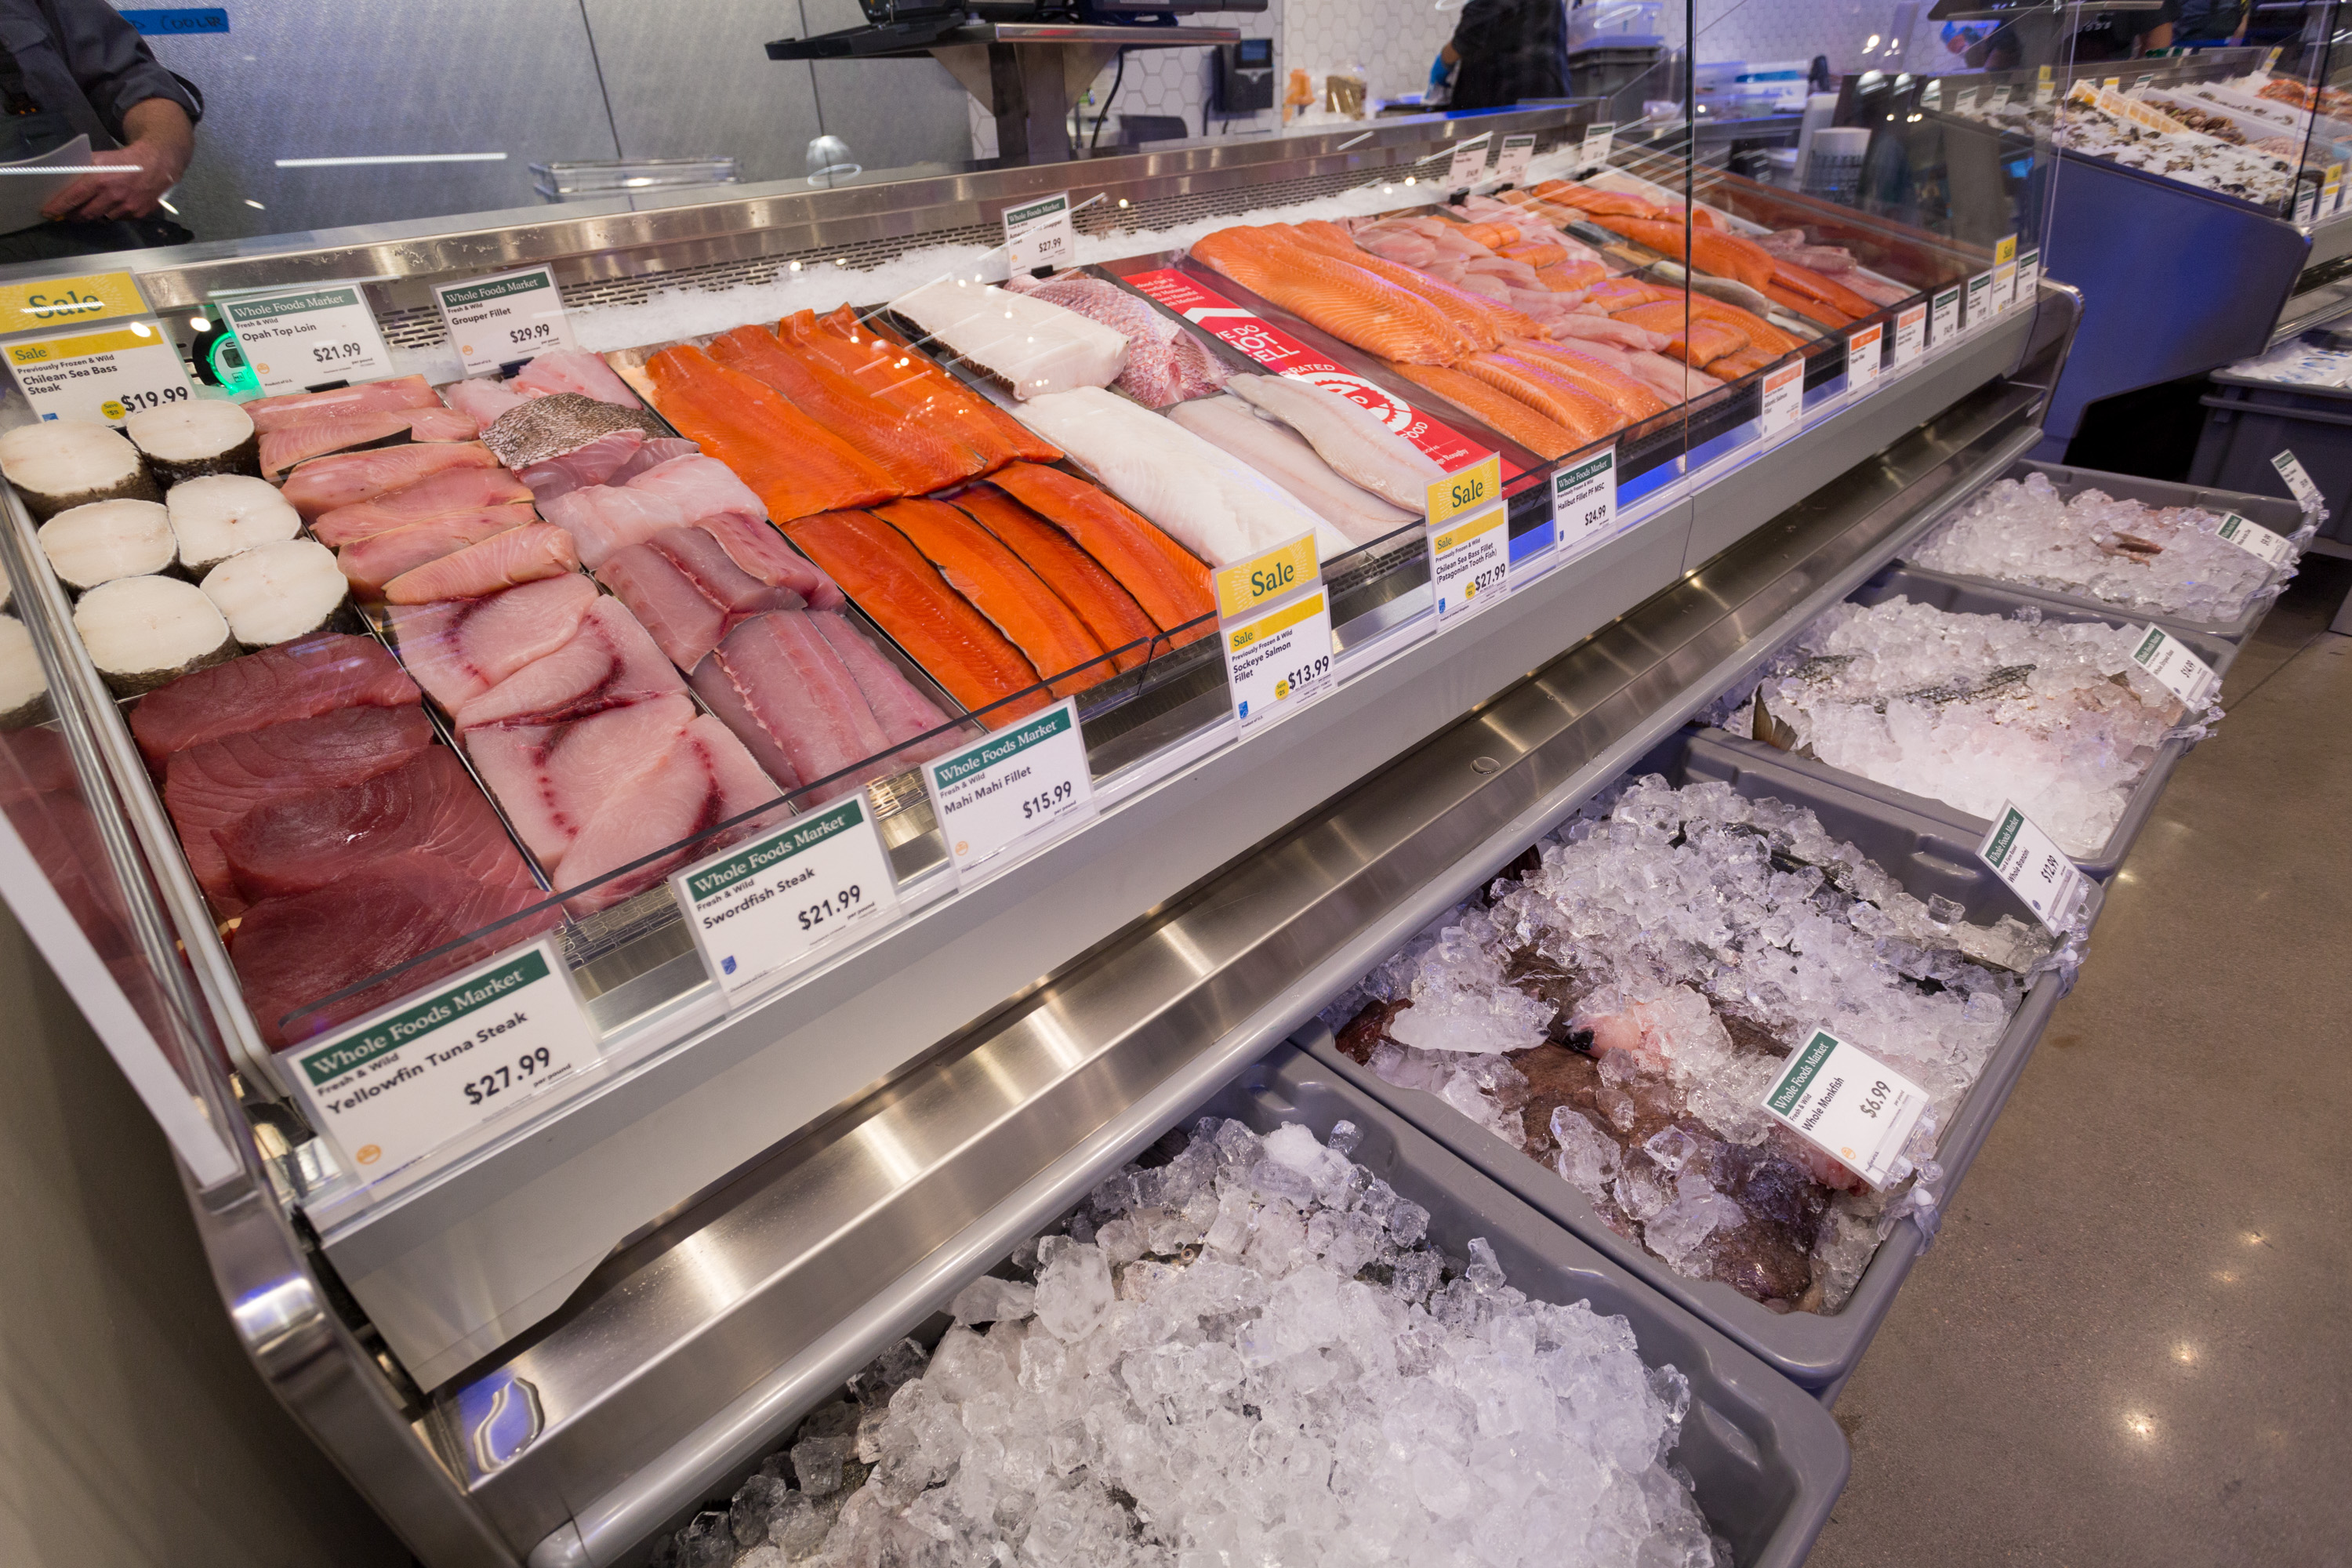 Wholesale seafood display to Offer A Cool Space for Storing 